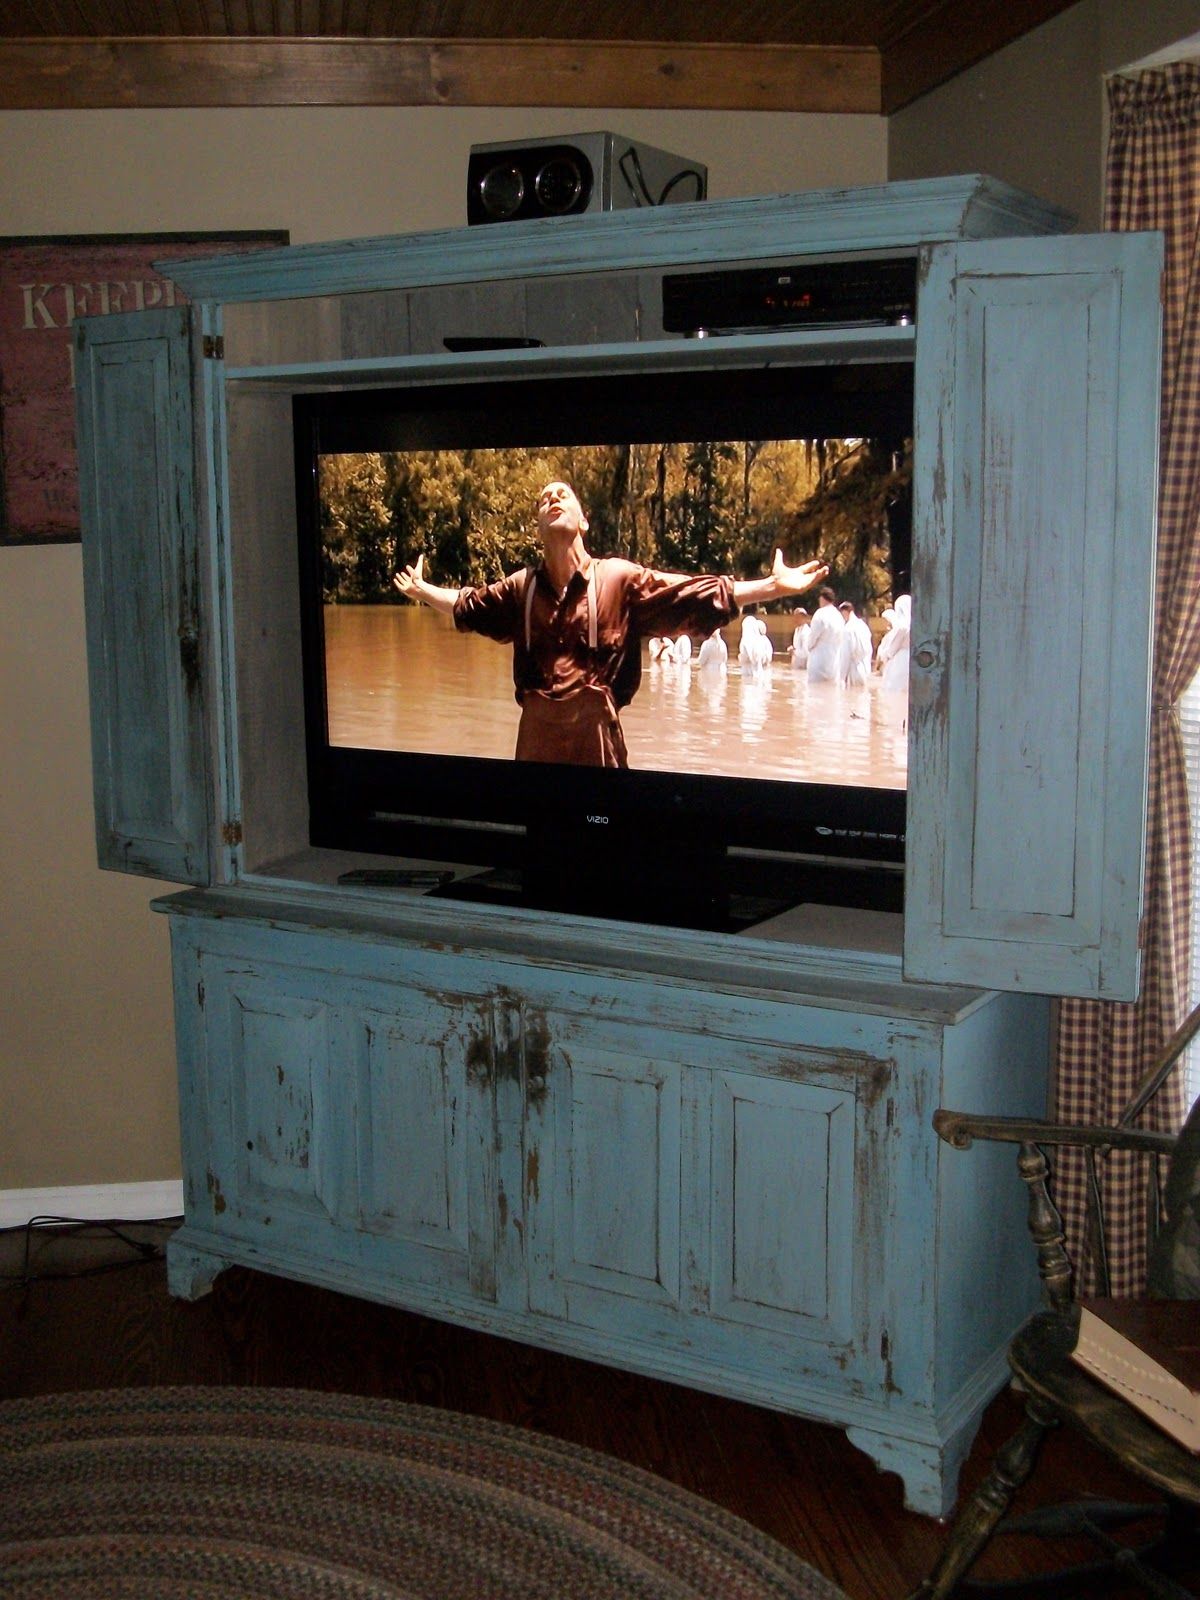 Letters From The Chair: Flat Screen Tv Cabinet Inside Tv Inside Cabinets (View 3 of 15)